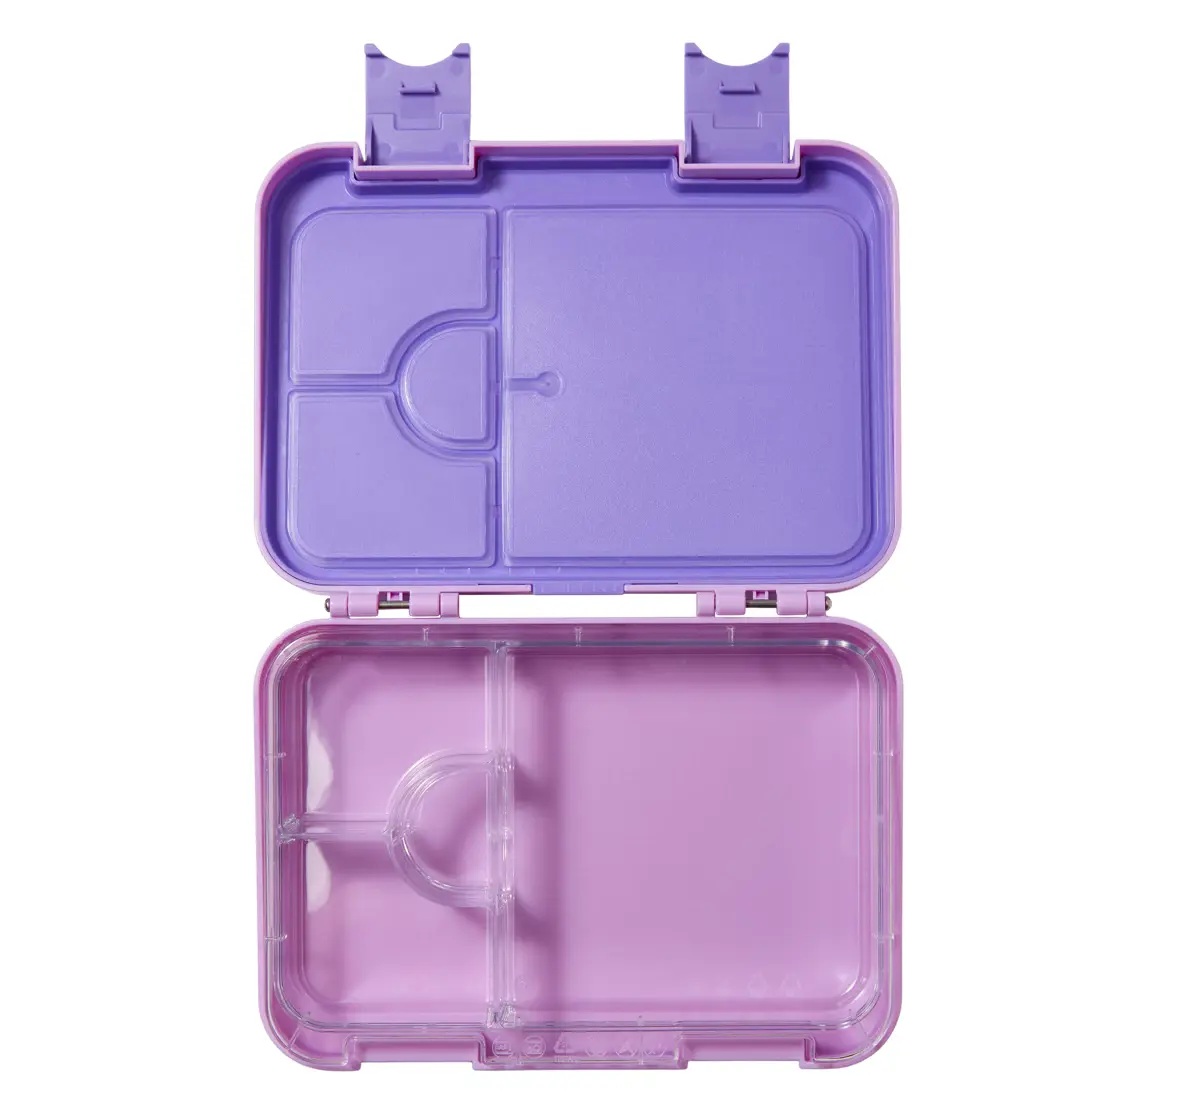 Smiggle Round About Lunch Box Bento, Medium, Lilac, 3Y+